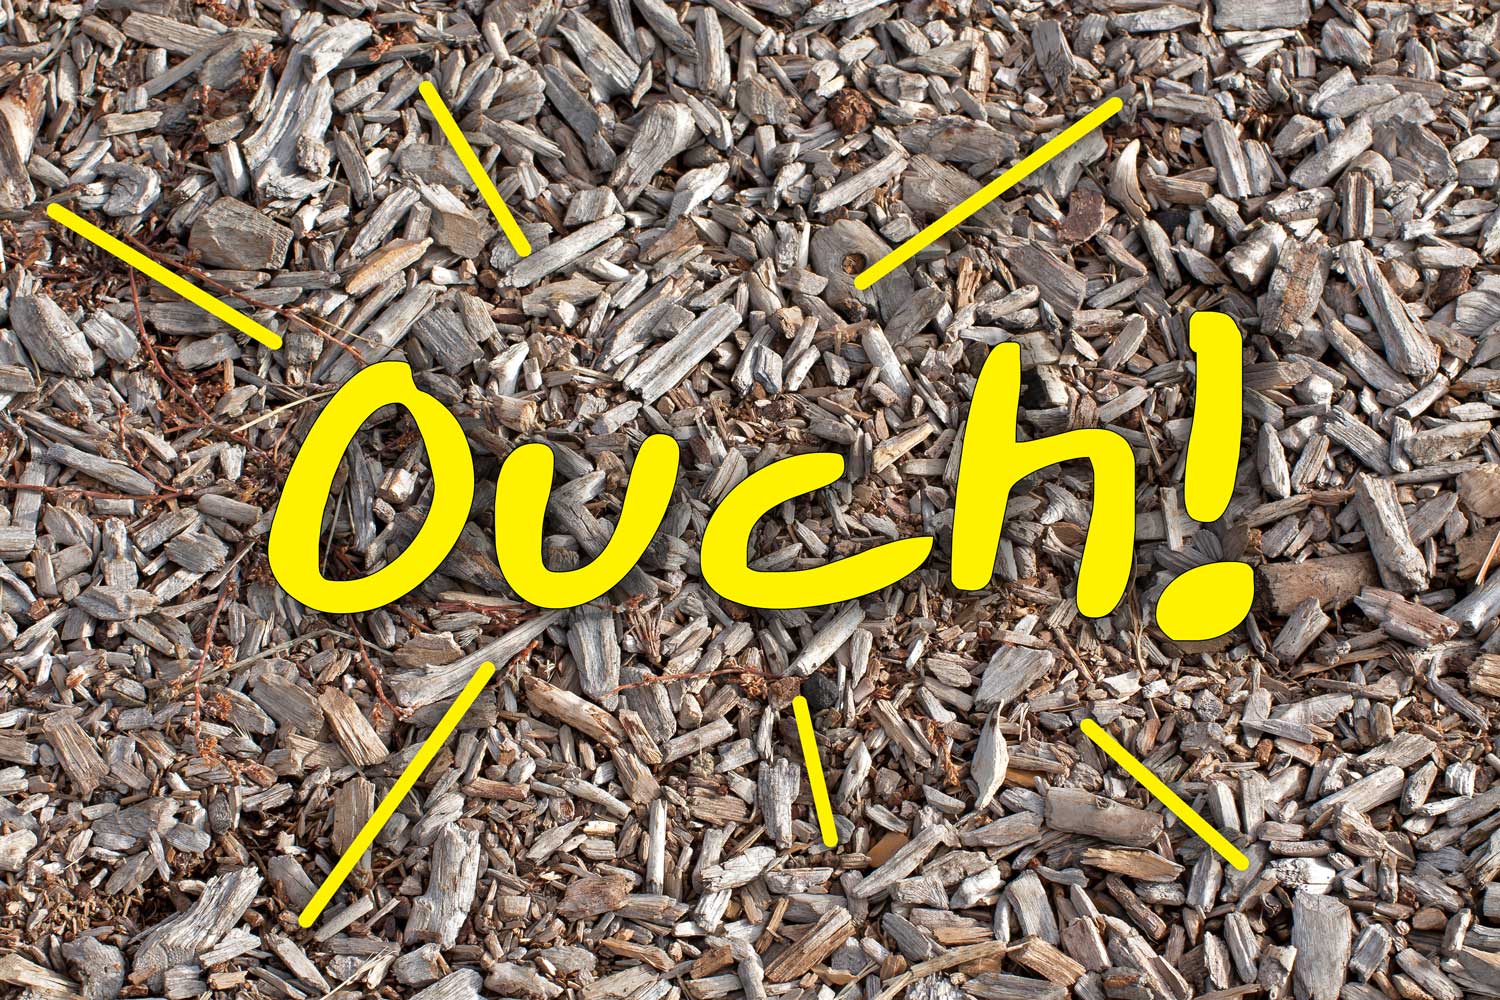 Replace Woodchips on Playgrounds with Poured Rubber Flooring (Safety Playground Surfaces)